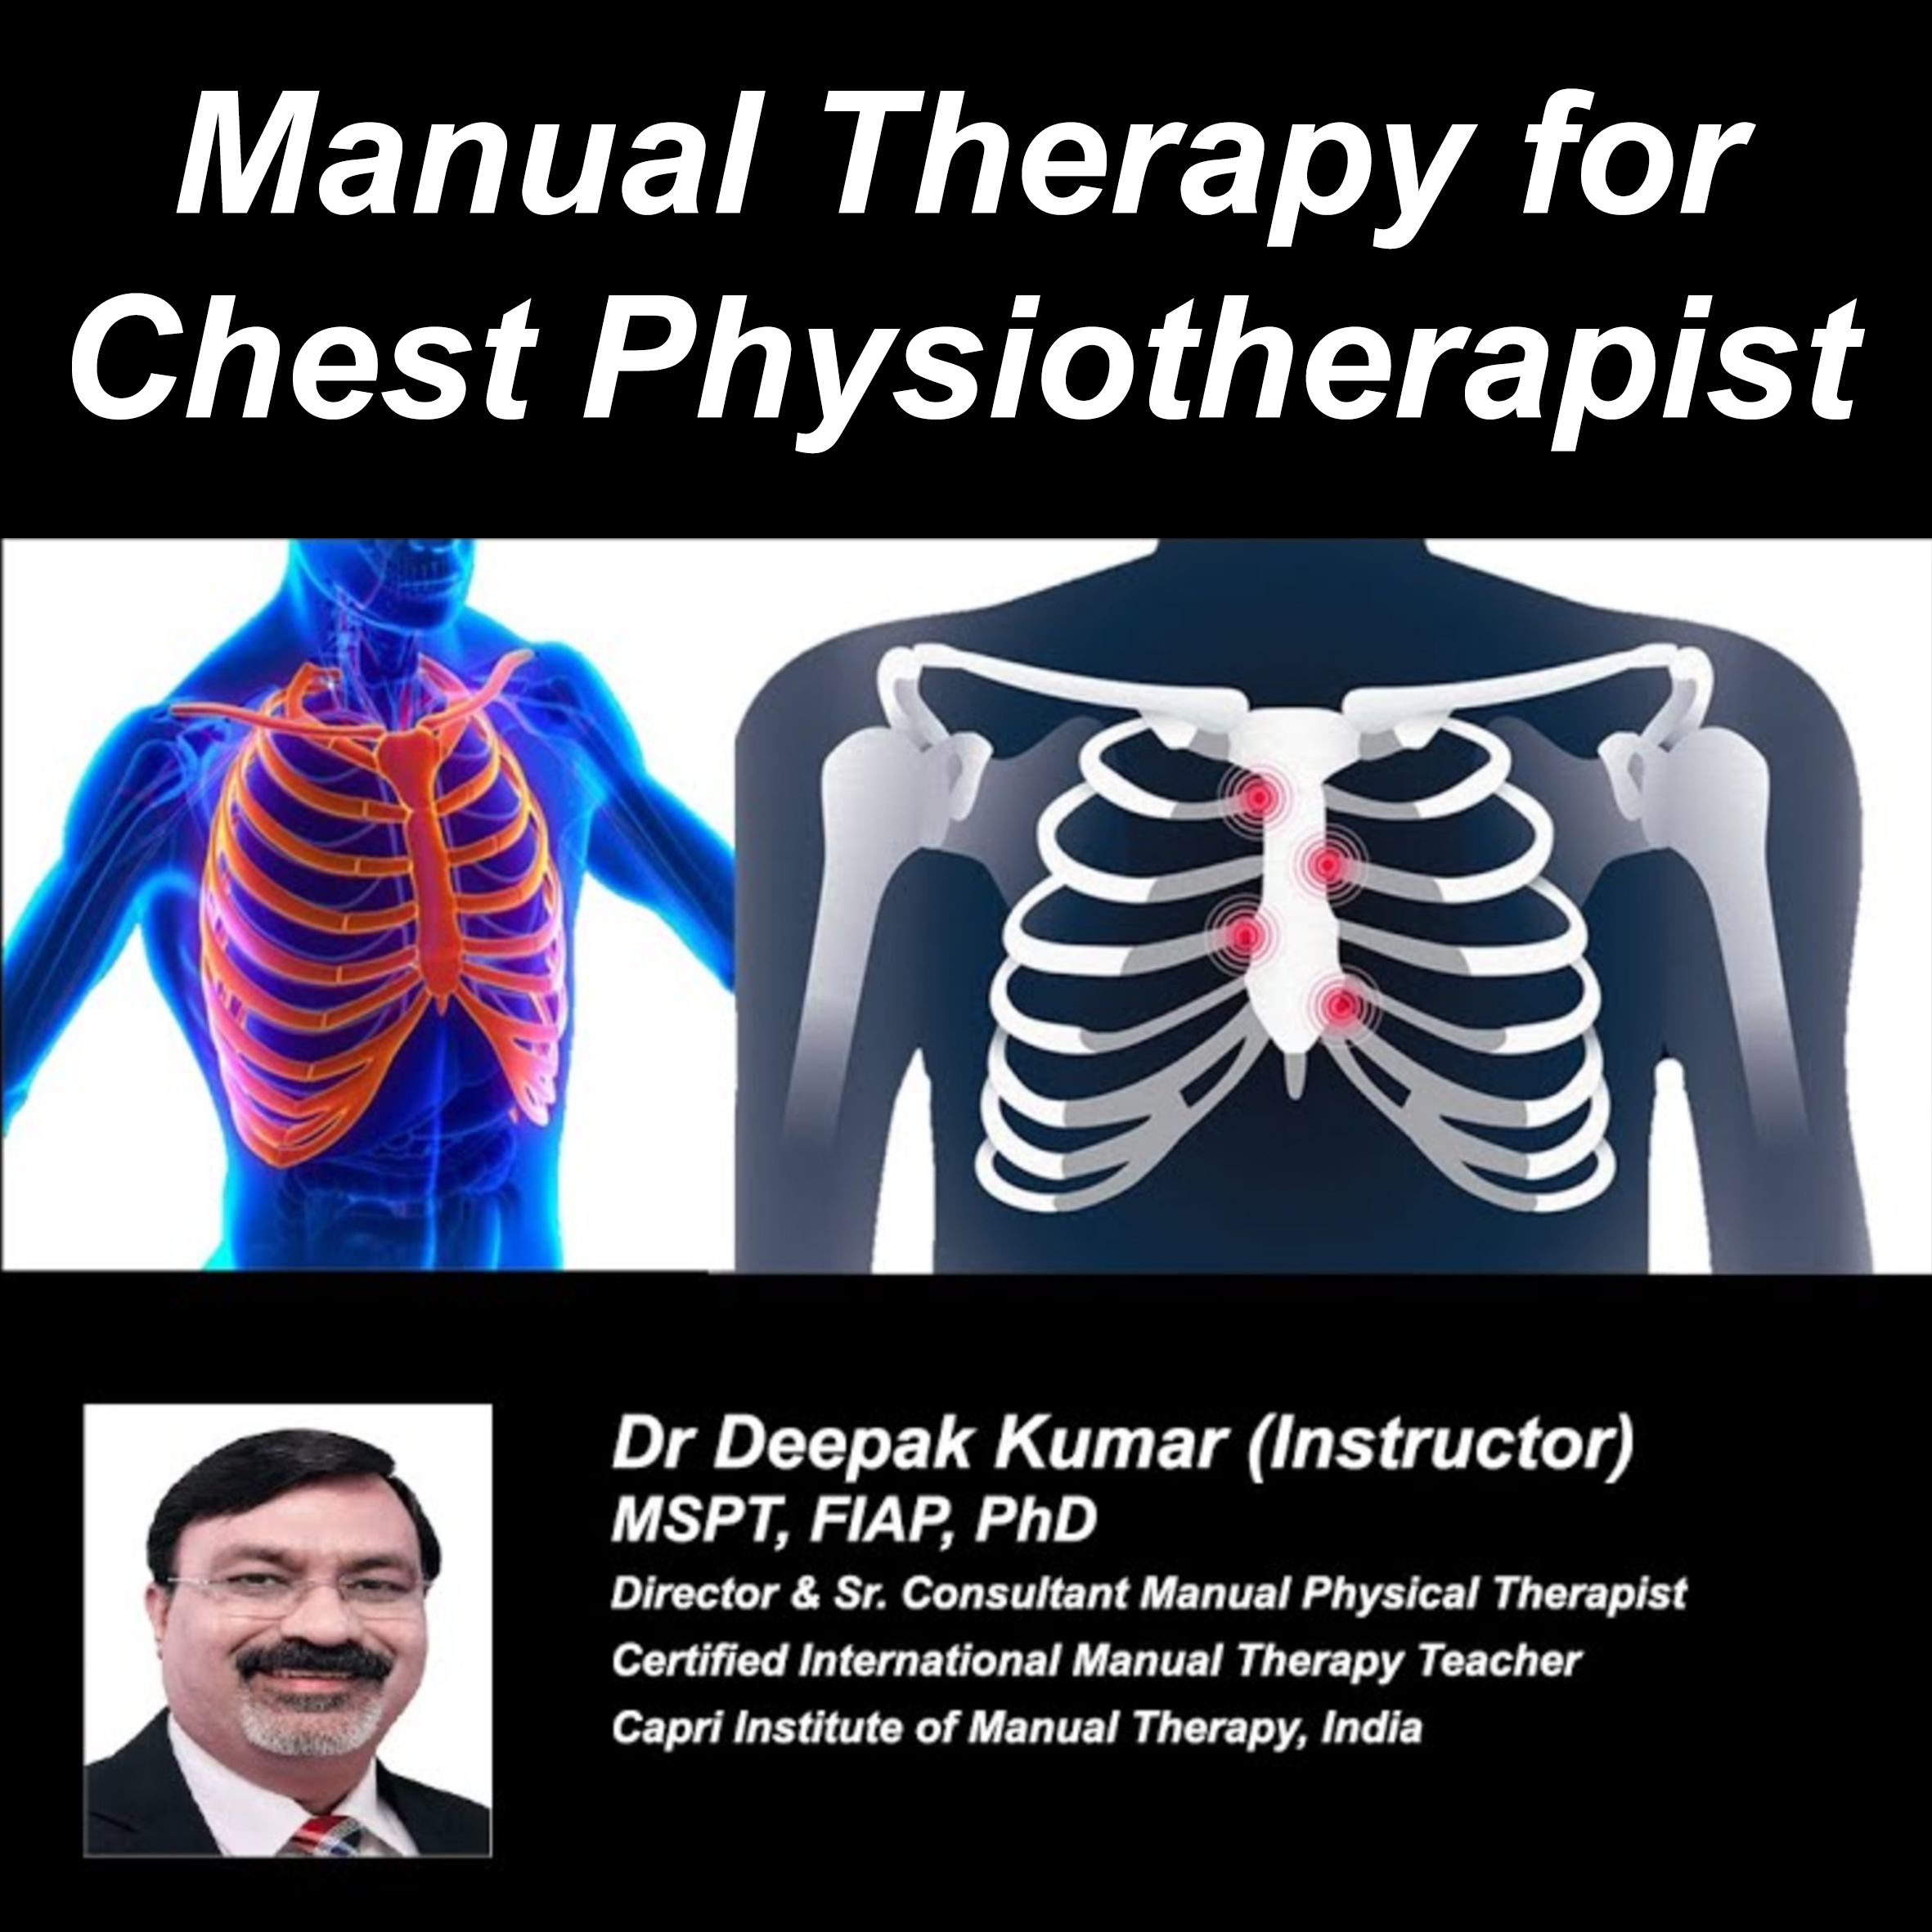 Manual Therapy for Chest Physiotherapists